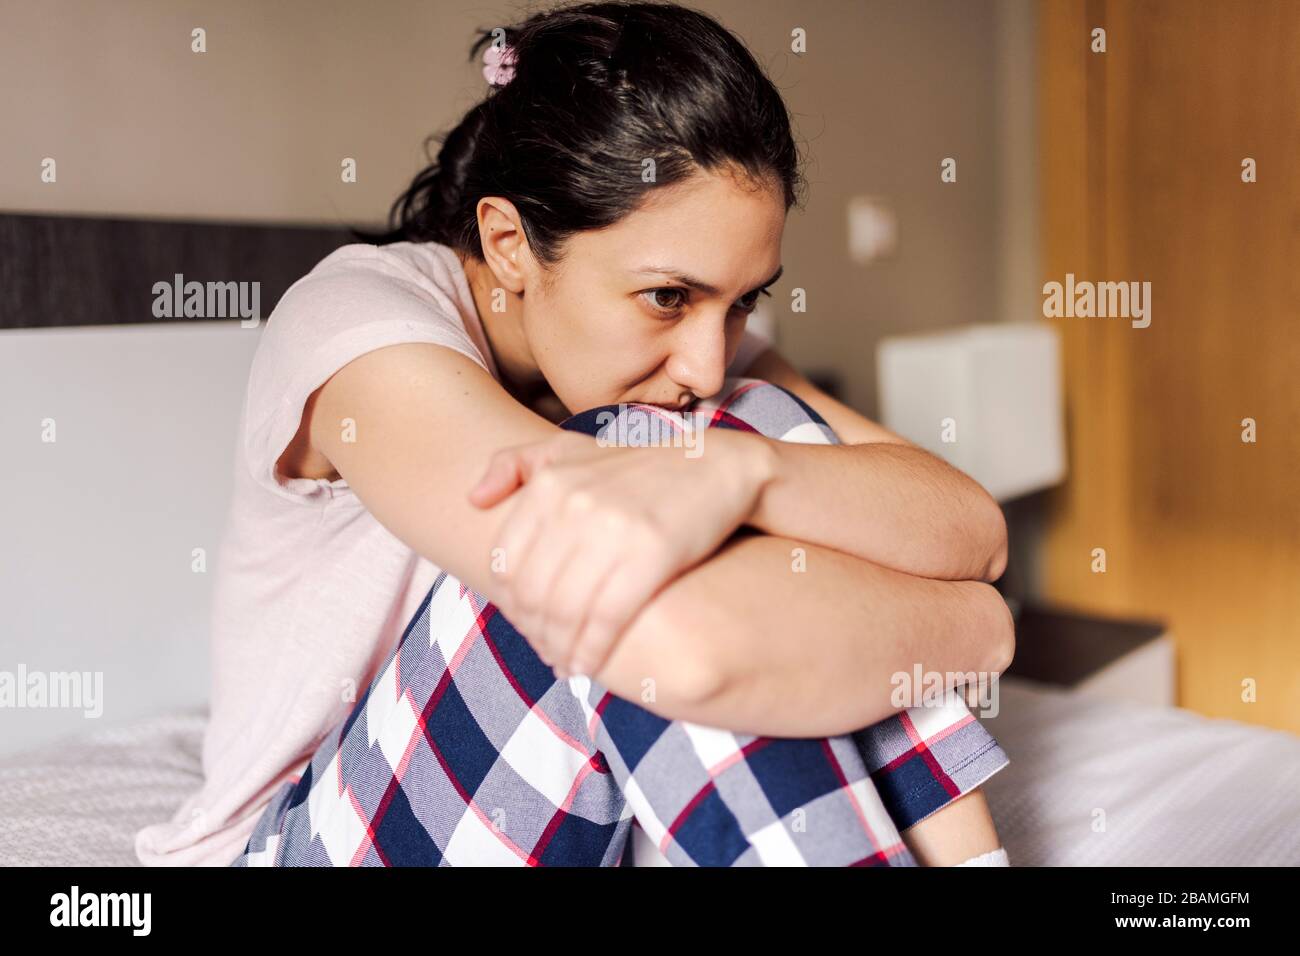 Sad young woman sitting alone in bed in a room. Concept of dramatic loneliness, sadness, depression, sad. Stock Photo